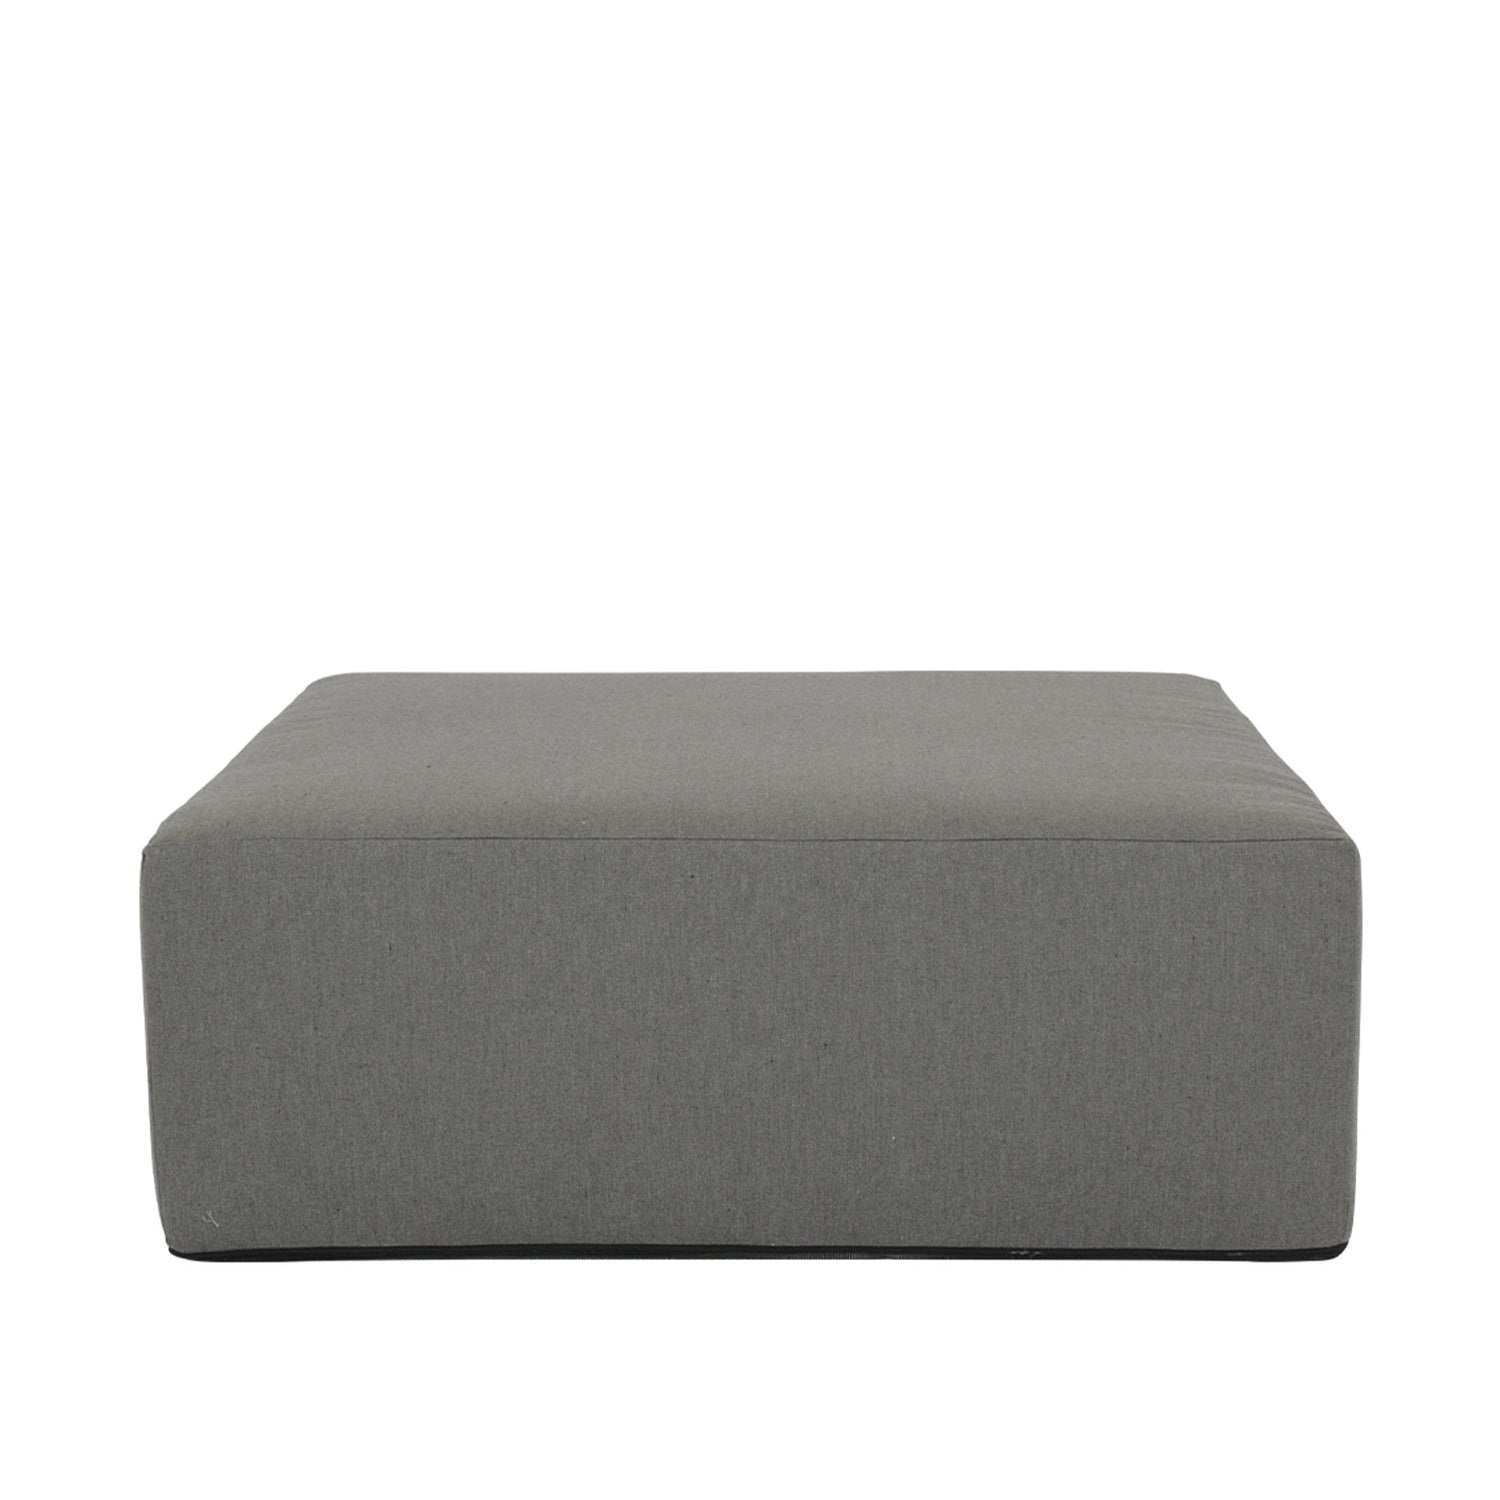 Sunset West, 48" Square Outdoor Ottoman